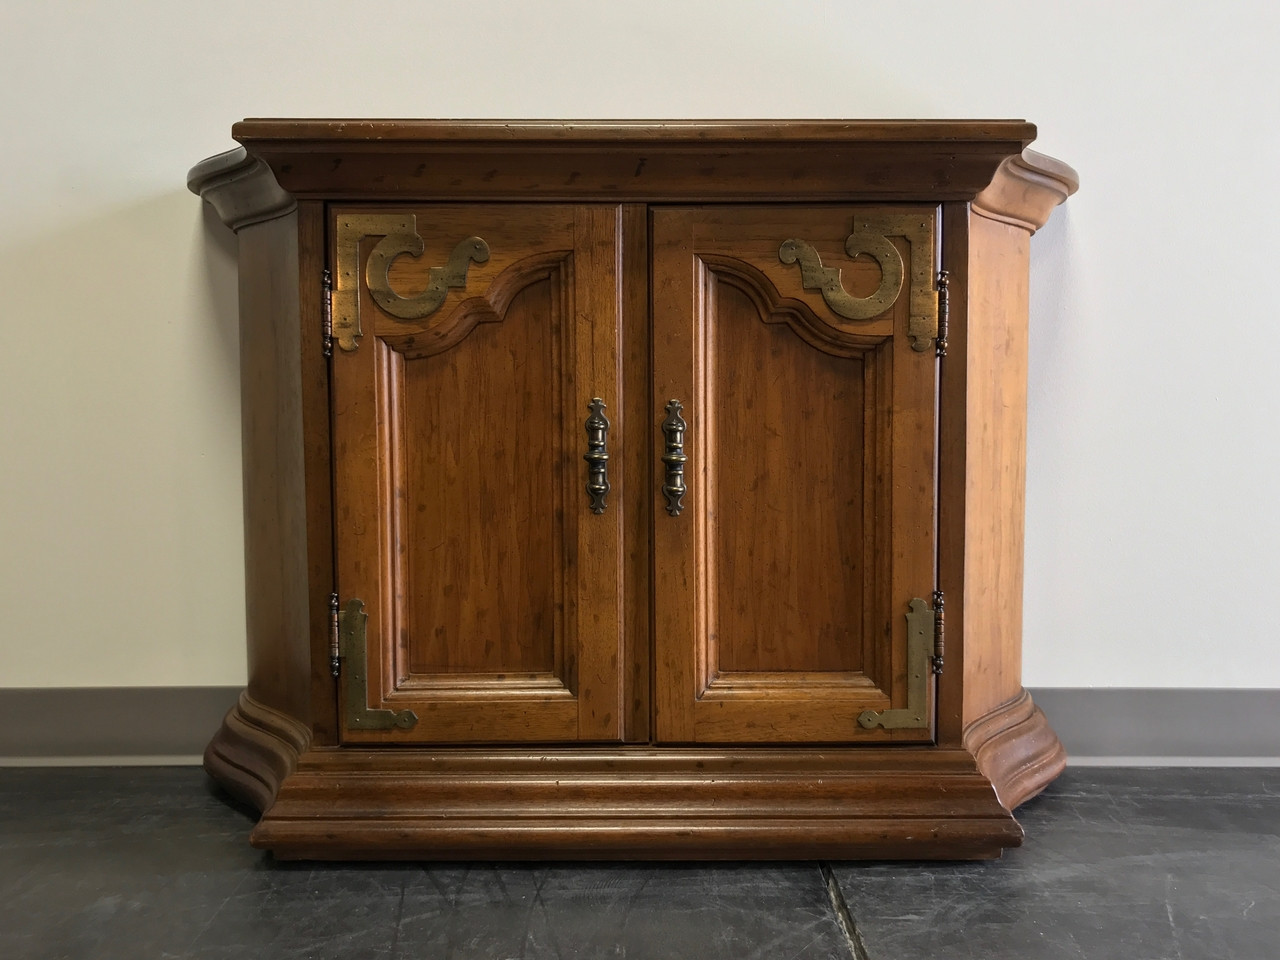 Sold Out Drexel Heritage Velero Southwestern Style Console Entry